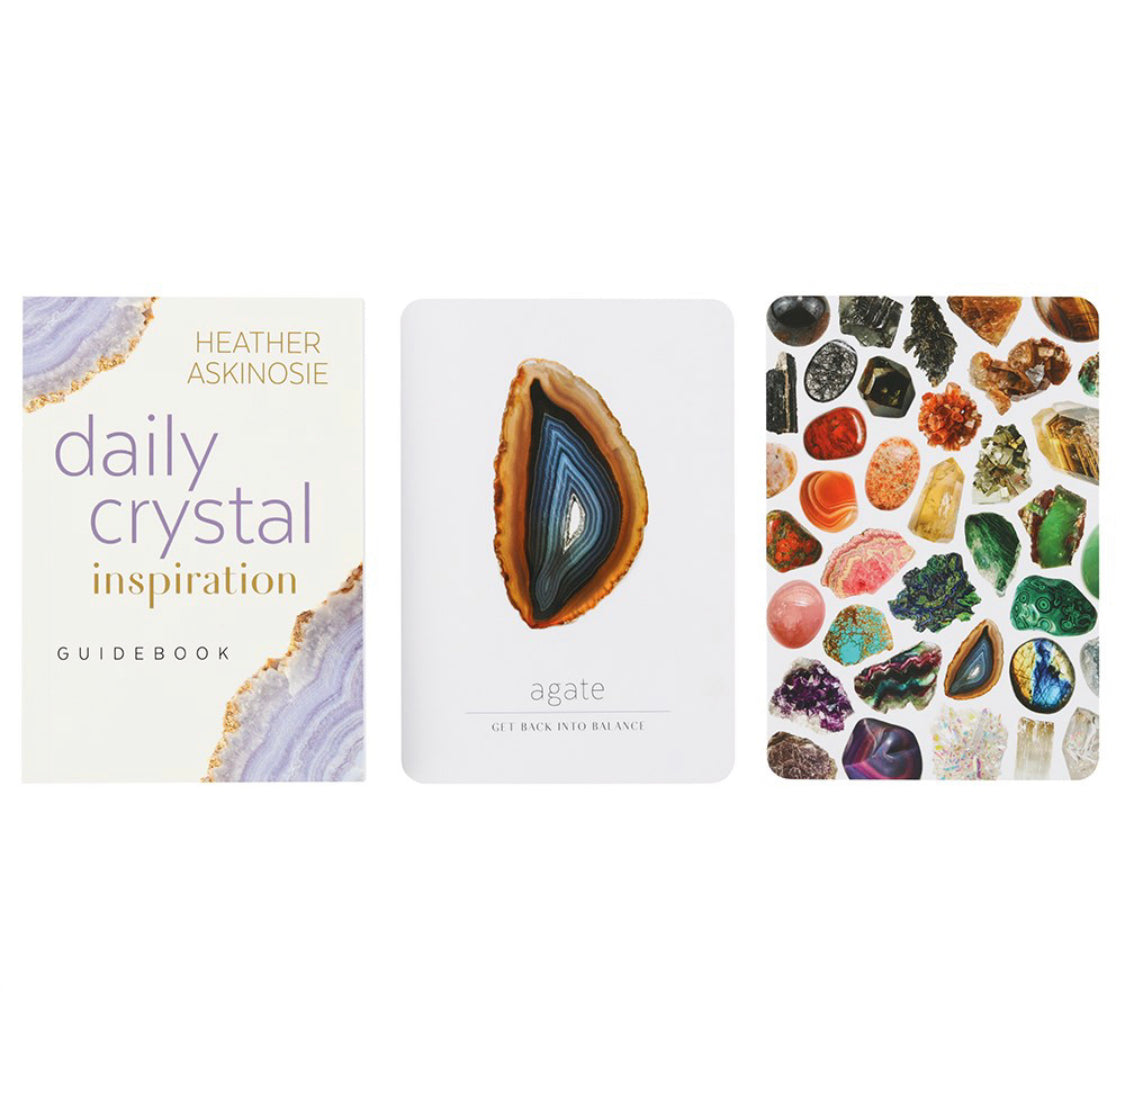 Daily Crystal Inspiration Oracle Deck